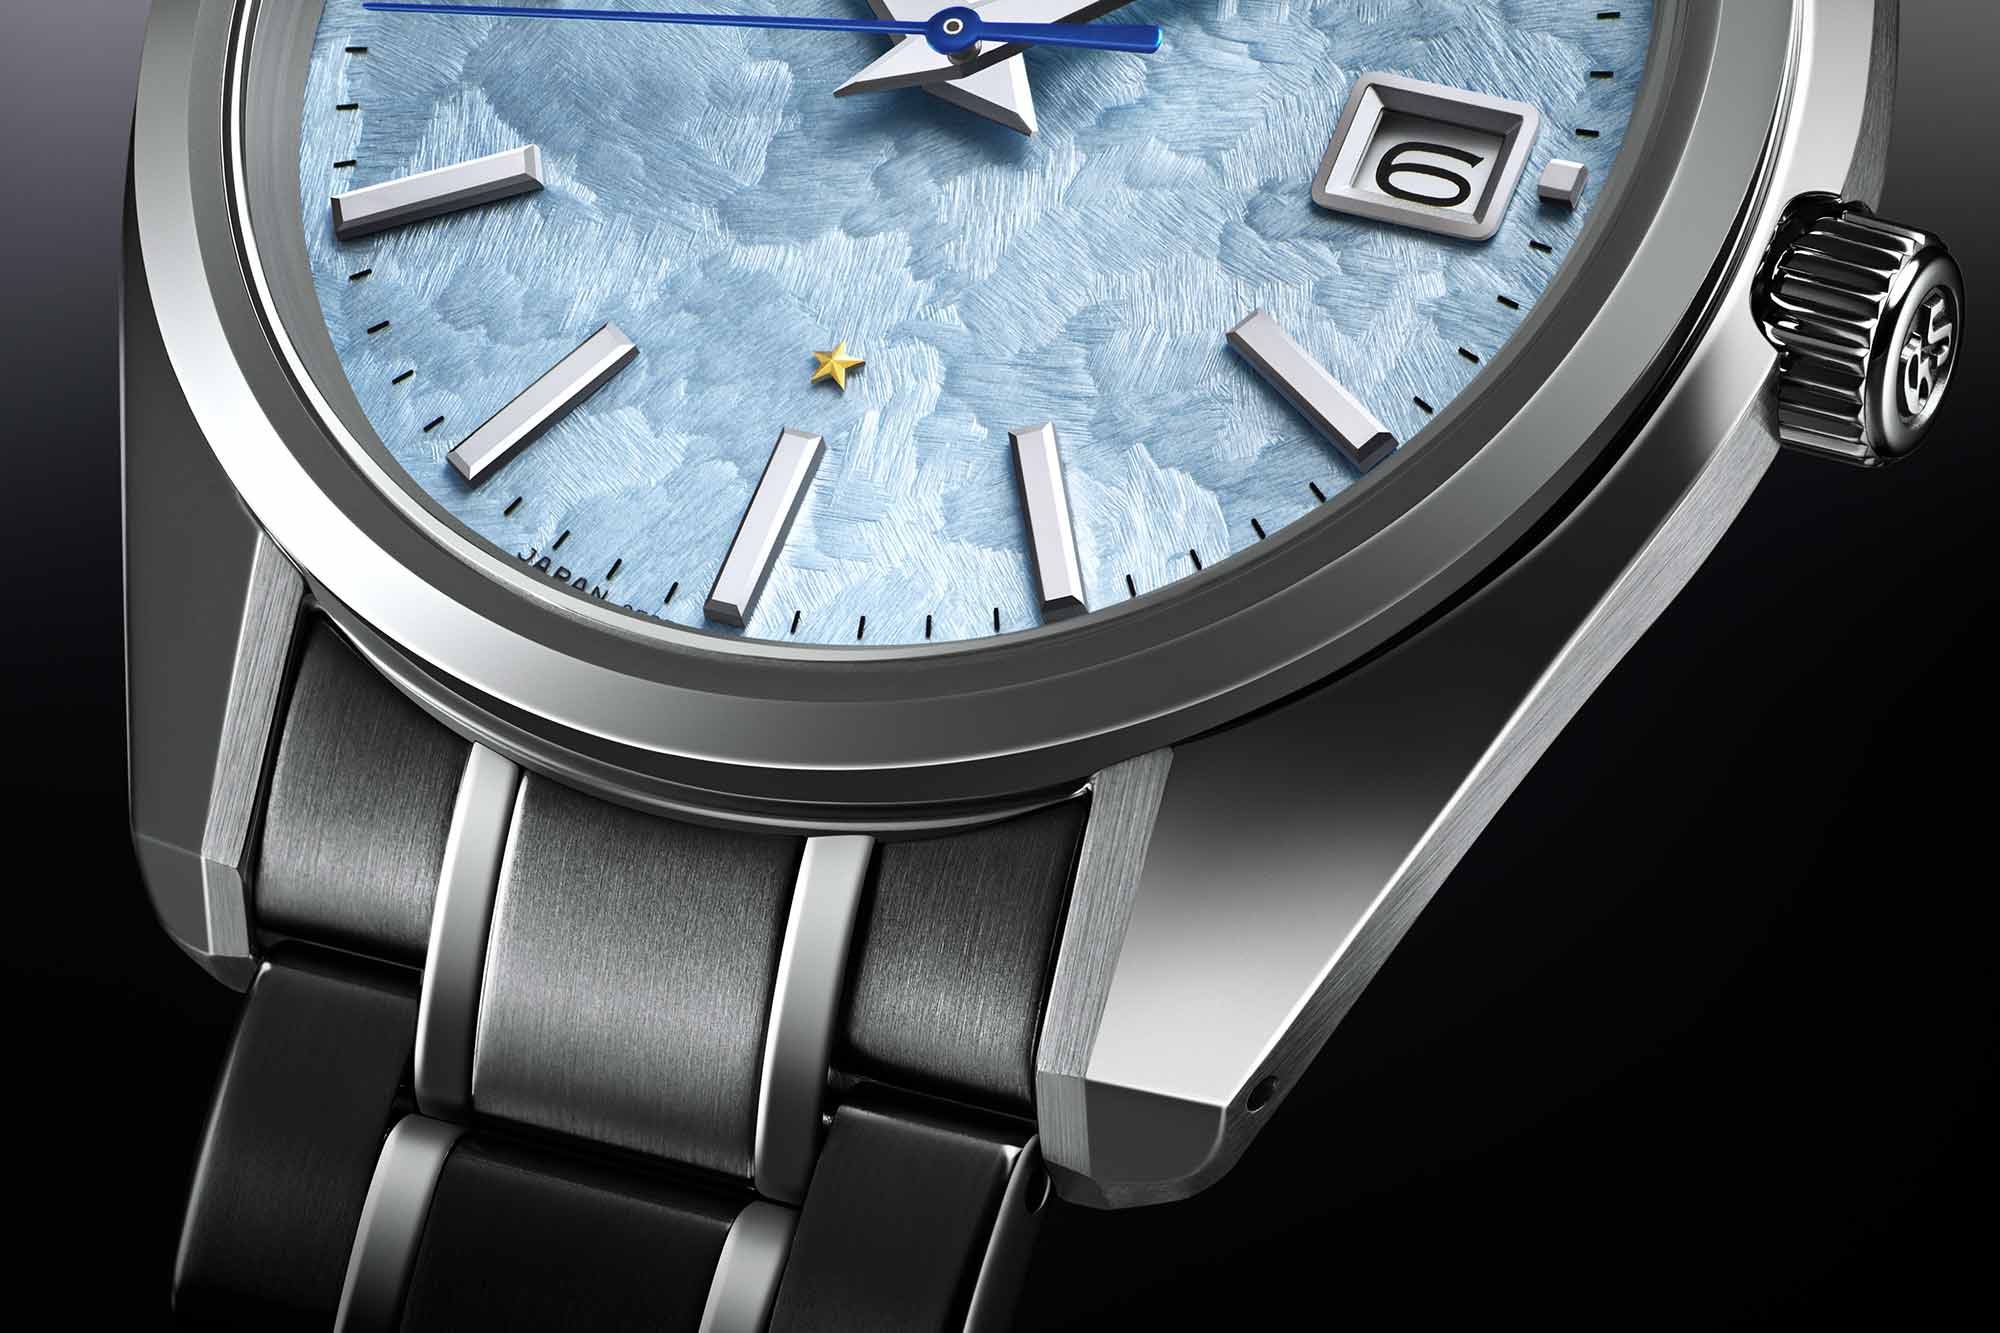 Grand Seiko Introduces a Quartz Limited Edition with a Beautiful Sky Blue  Dial - Worn & Wound